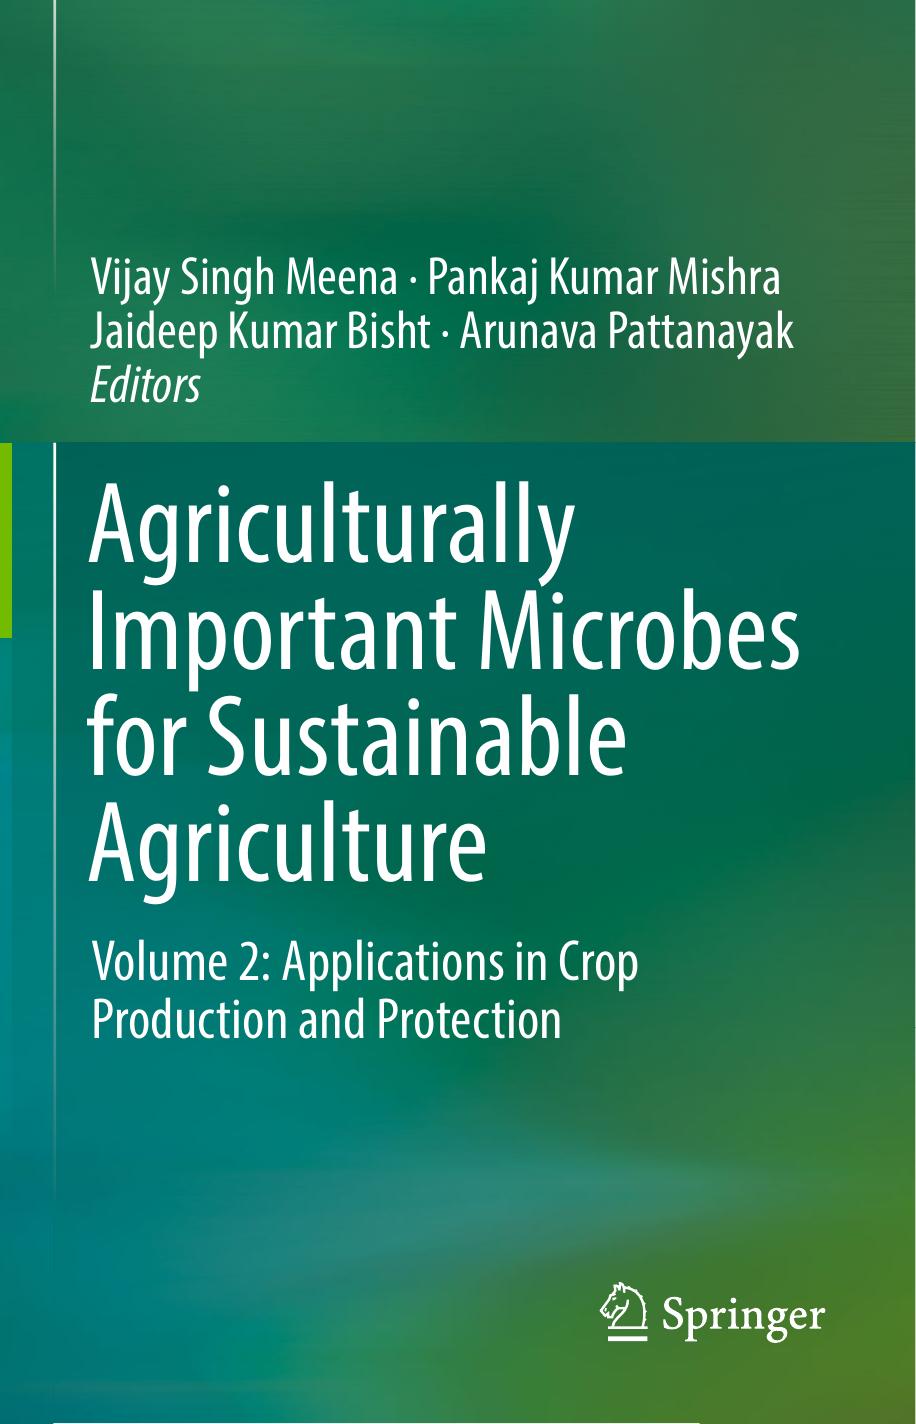 Agriculturally important microbes for sustainable agriculture. Volume 2, Applications in crop production and protection 2017